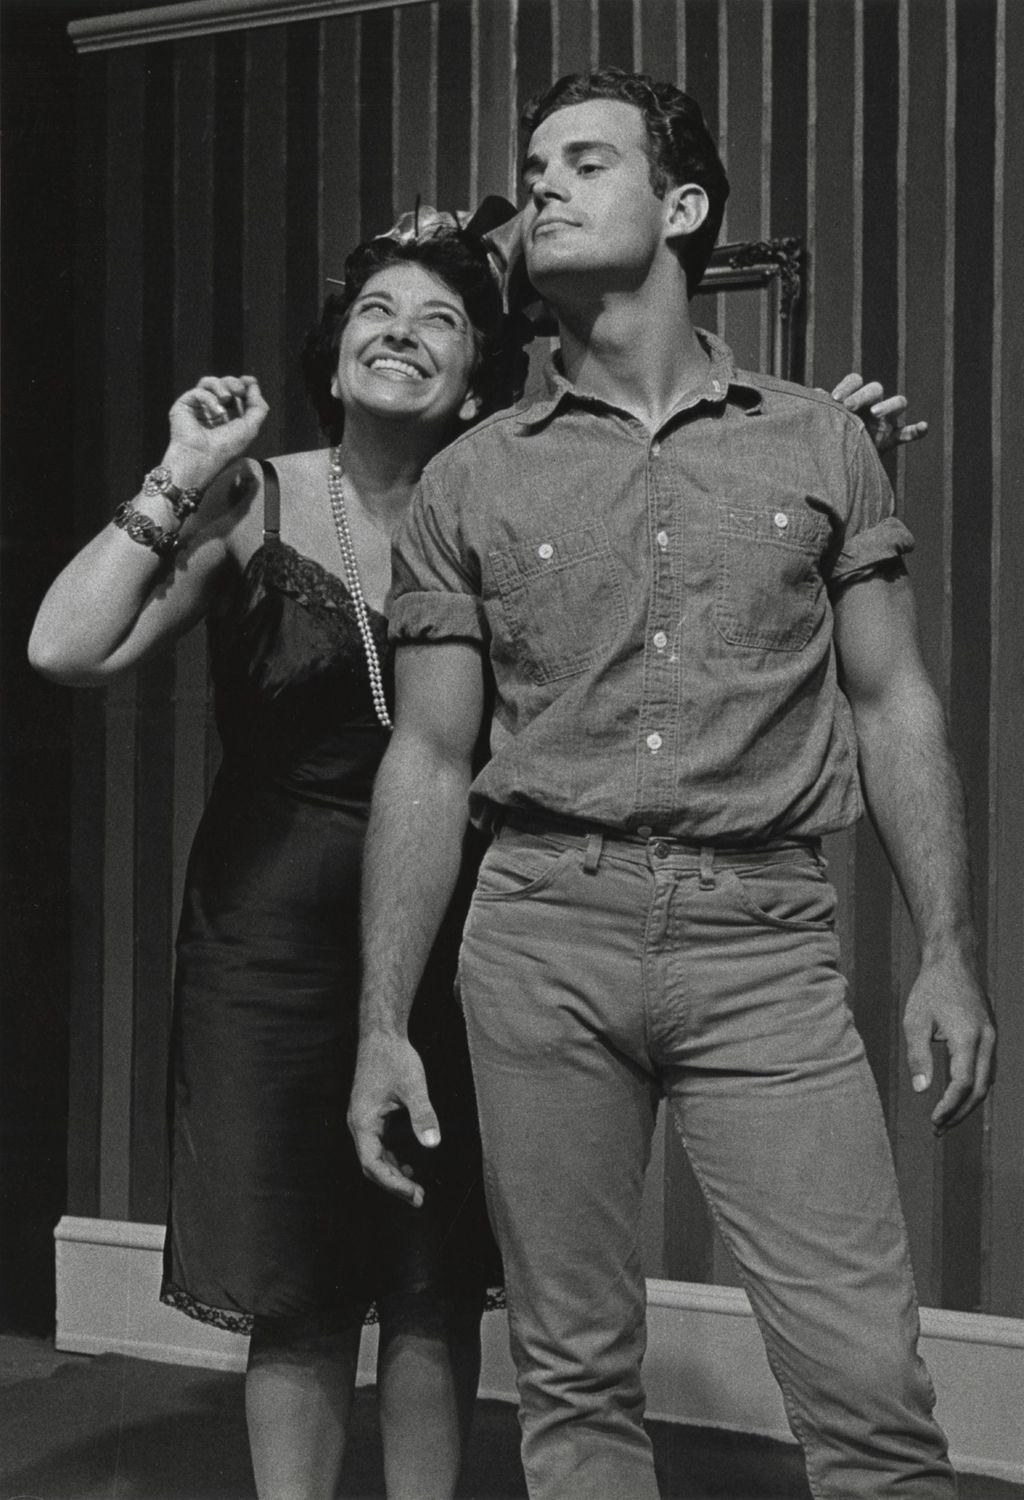 Tedra Klein and Douglas Elliott on stage in production of "The American Dream" at Hull-House Theater